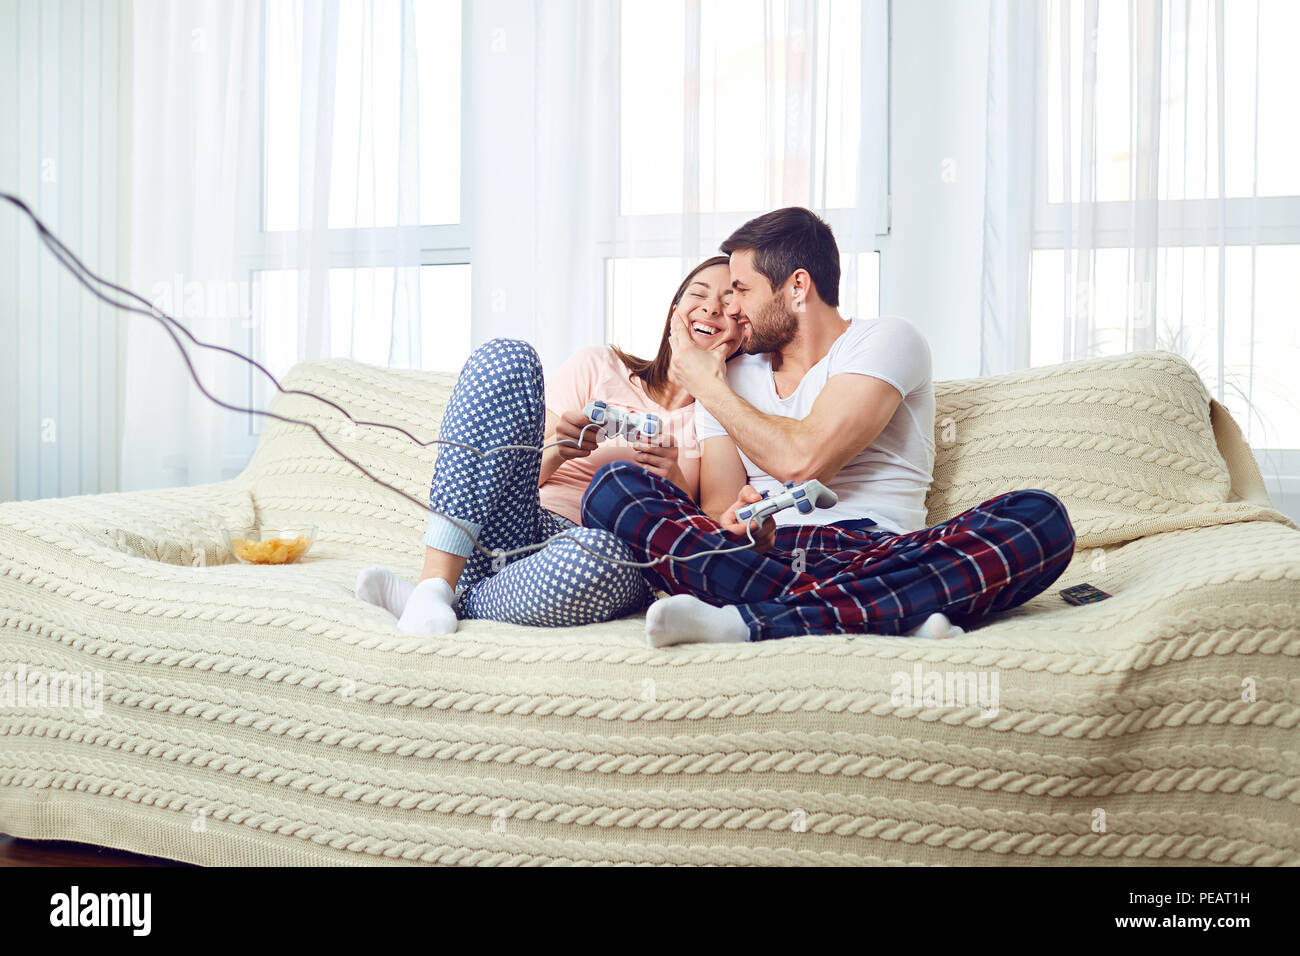 Couple playing video game sitting on sofa in room. Stock Photo